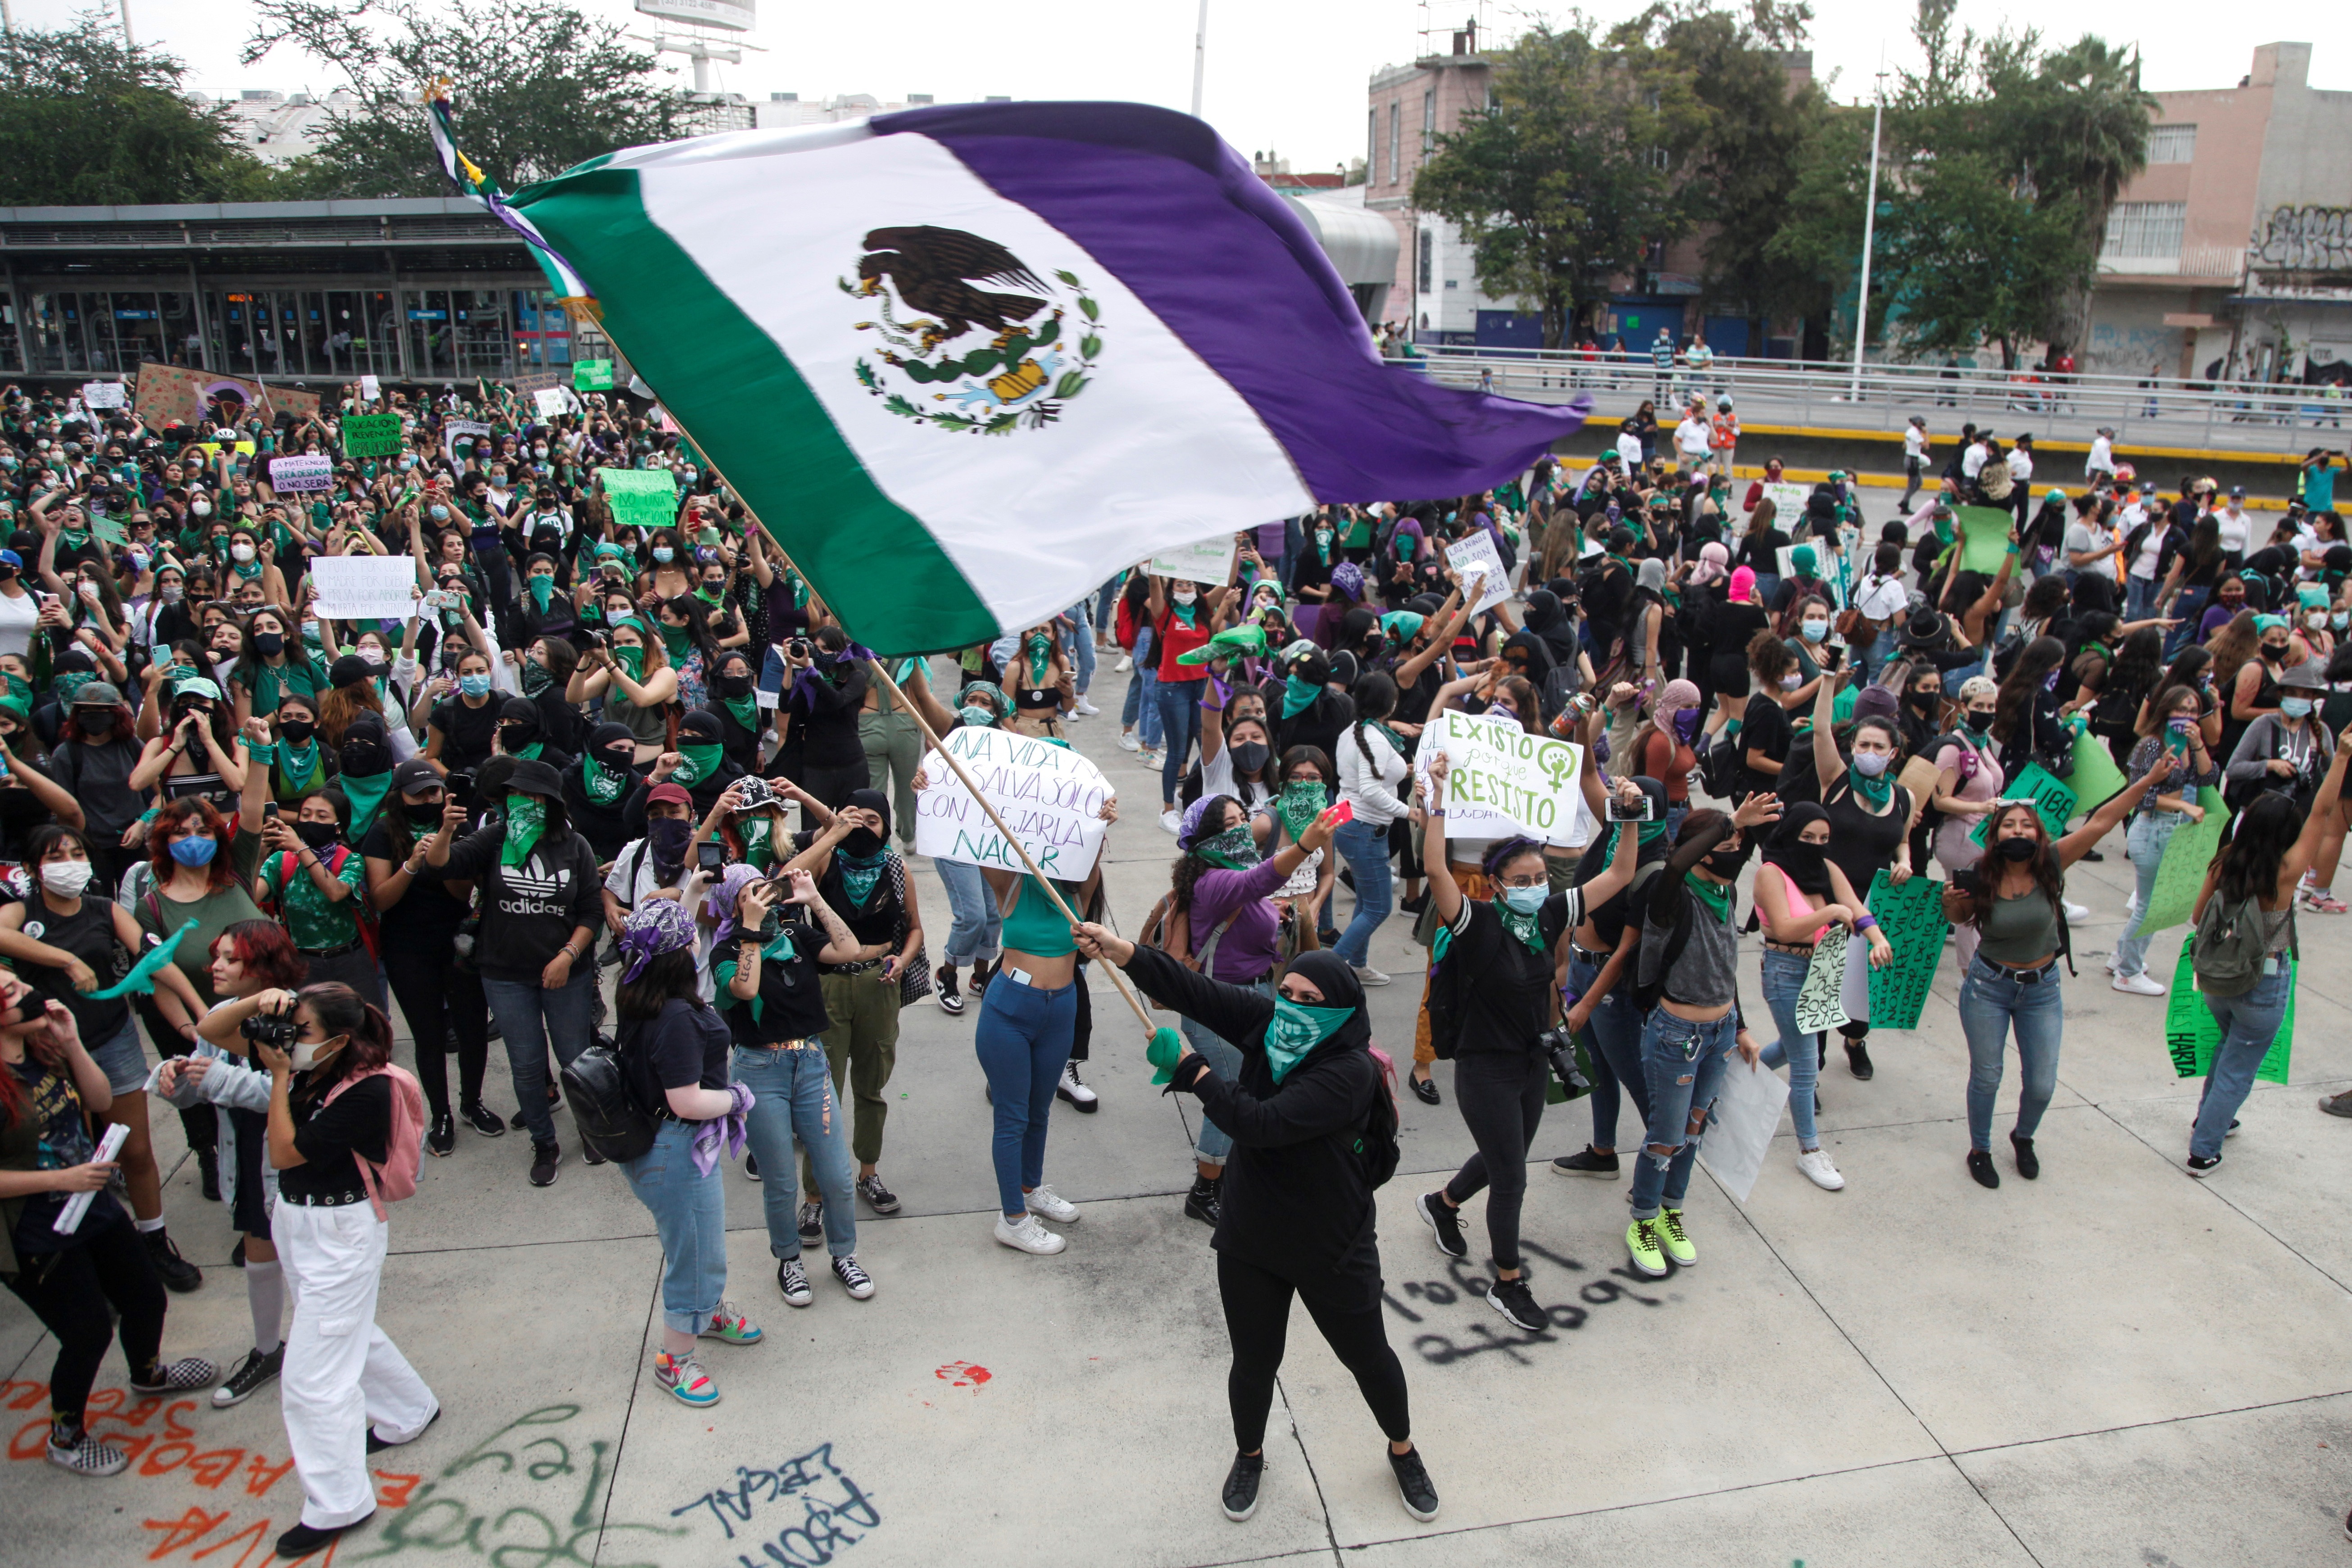 File photo of hundreds of women marching in favor of legal and safe abortion in Mexico.  EFE / Francisco Guasco